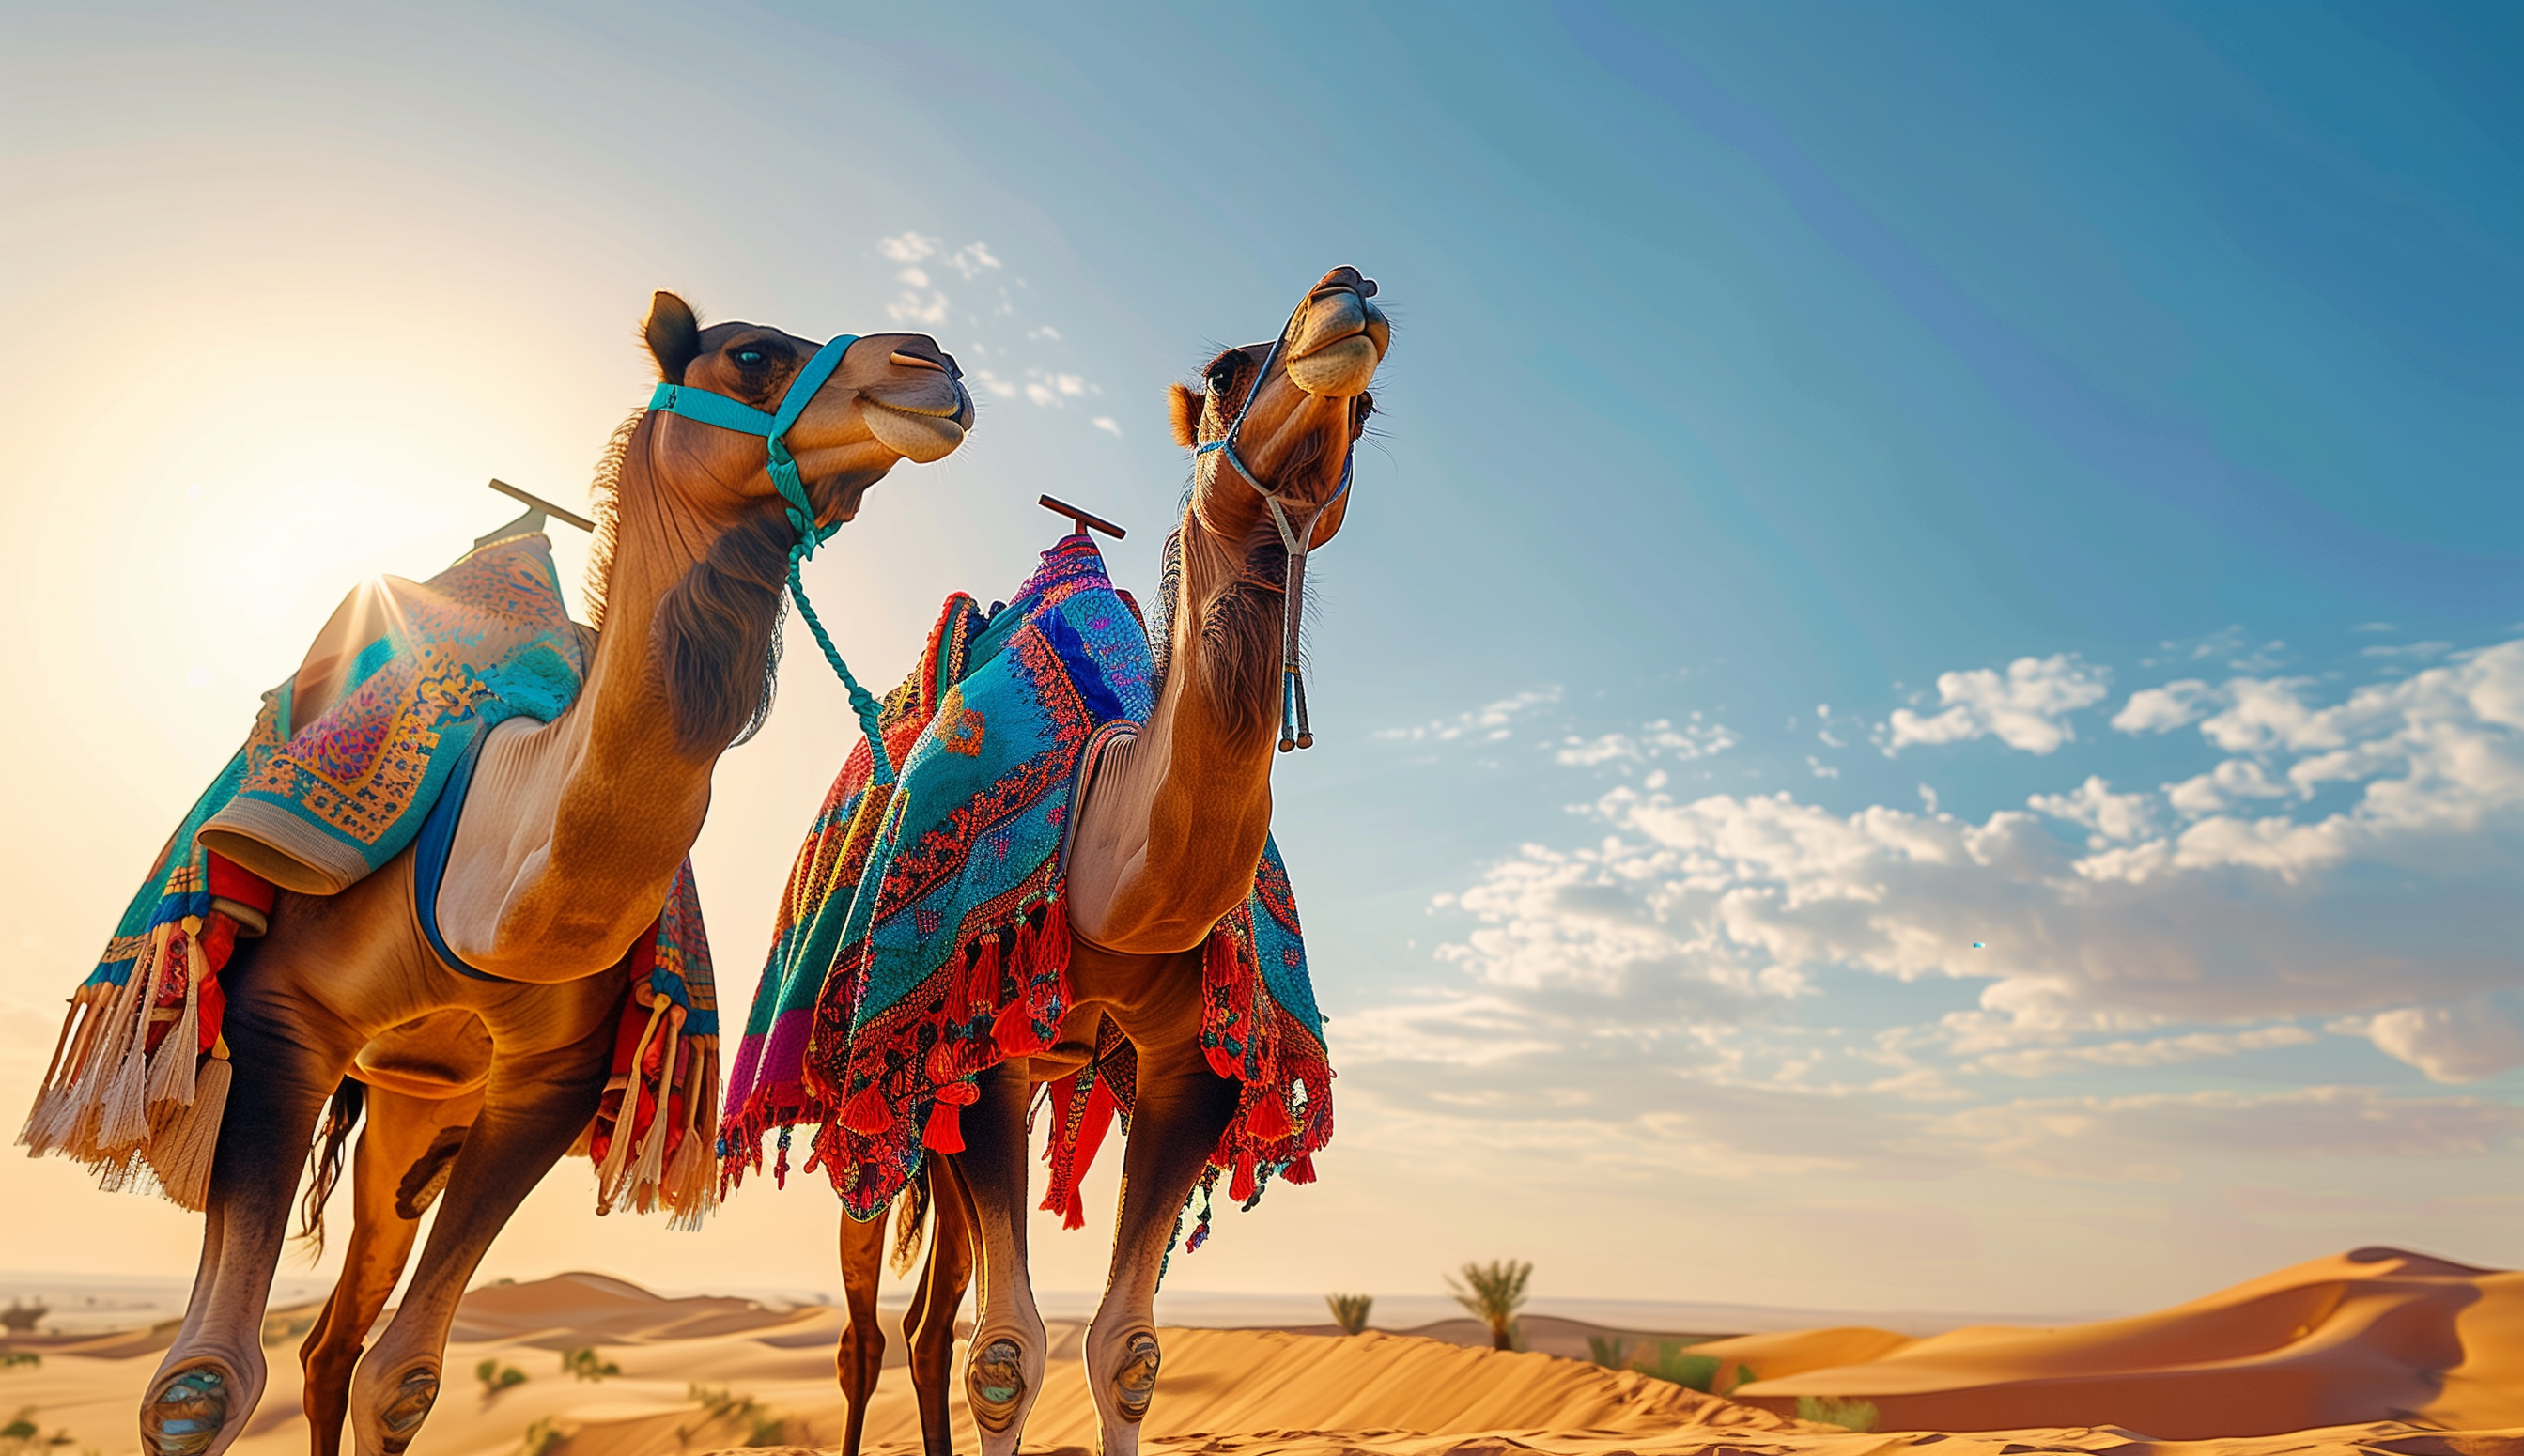 Want rapid growth? It’s time to think like camels.